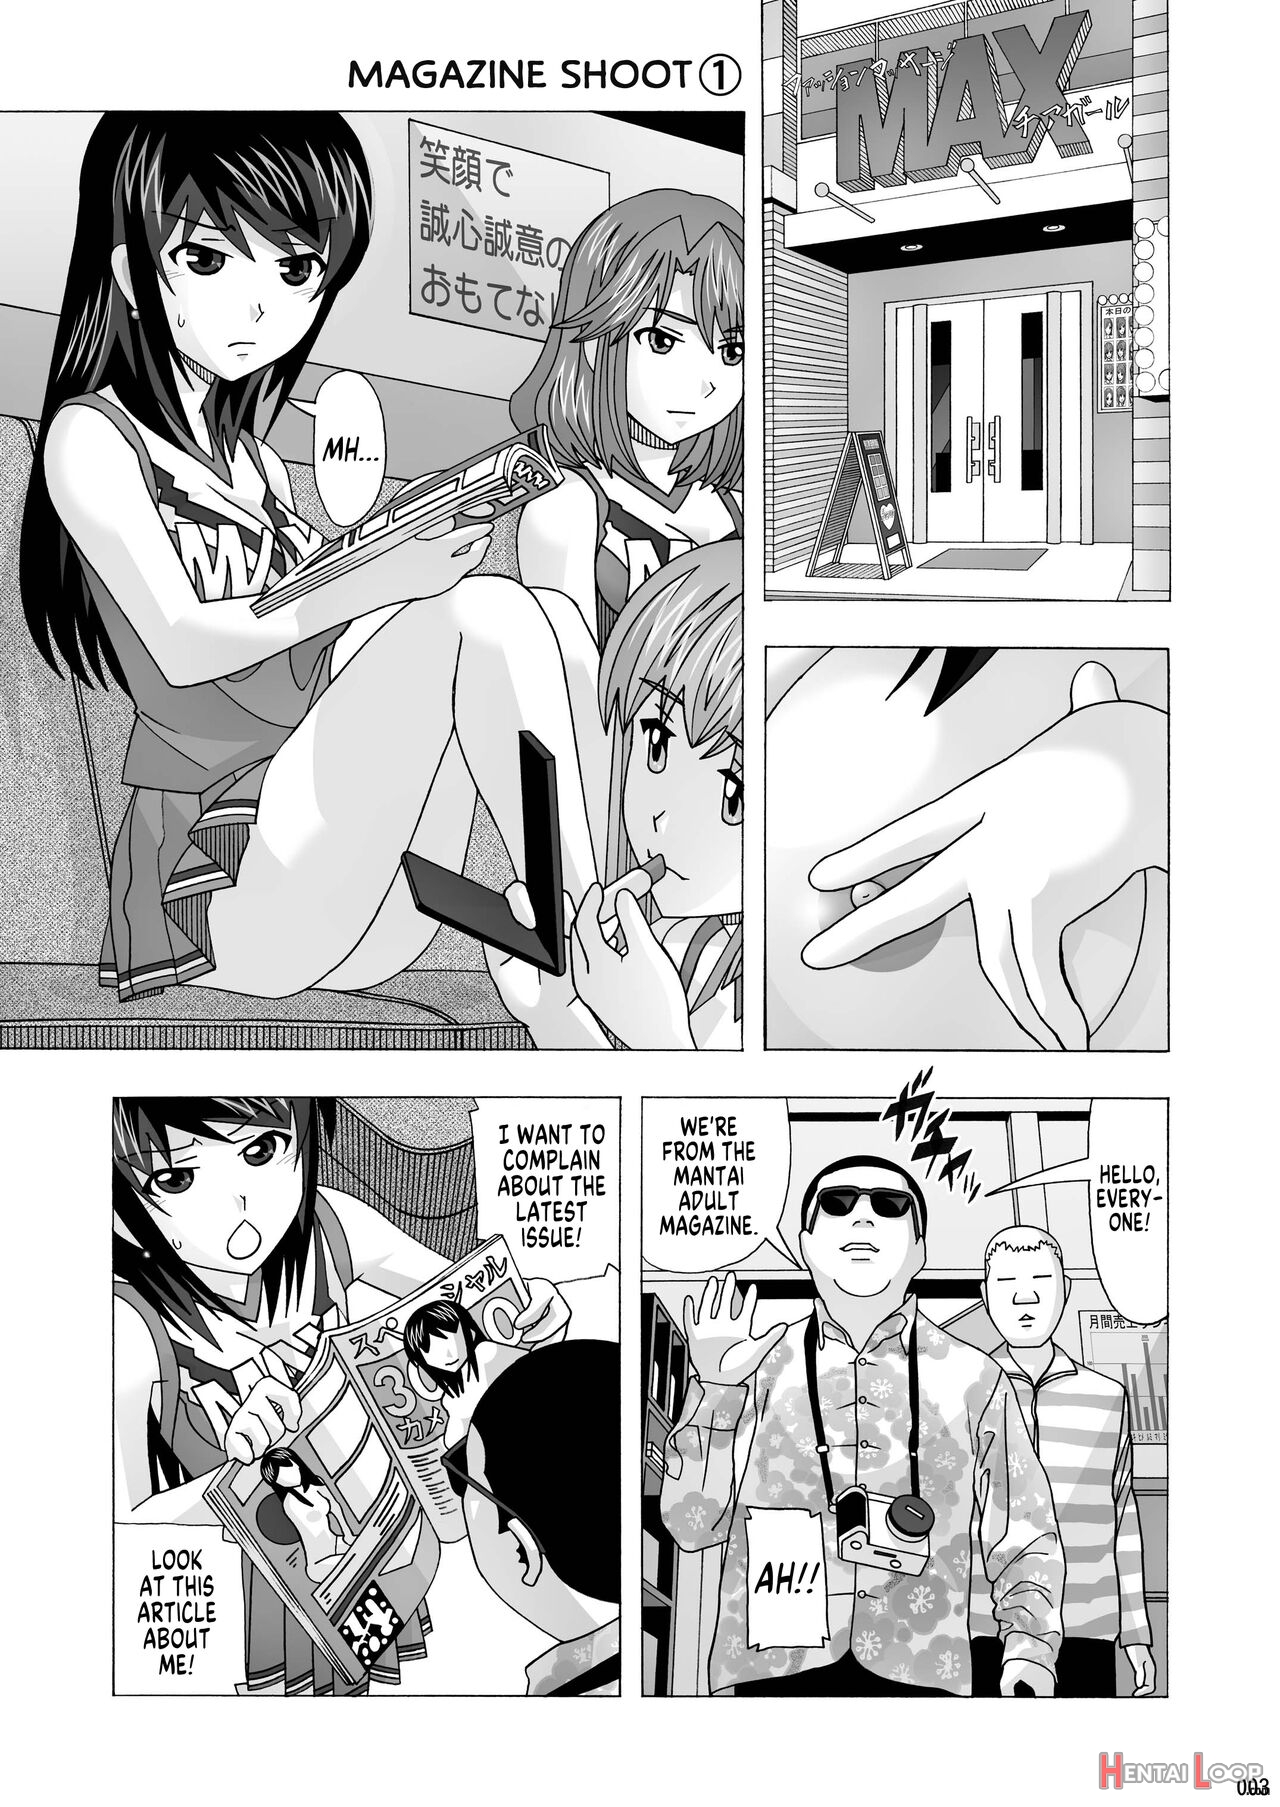 My Neighbor Is A Sex Worker Anthology 1 "fashion Massage Establishment" Ch.1-2 page 2